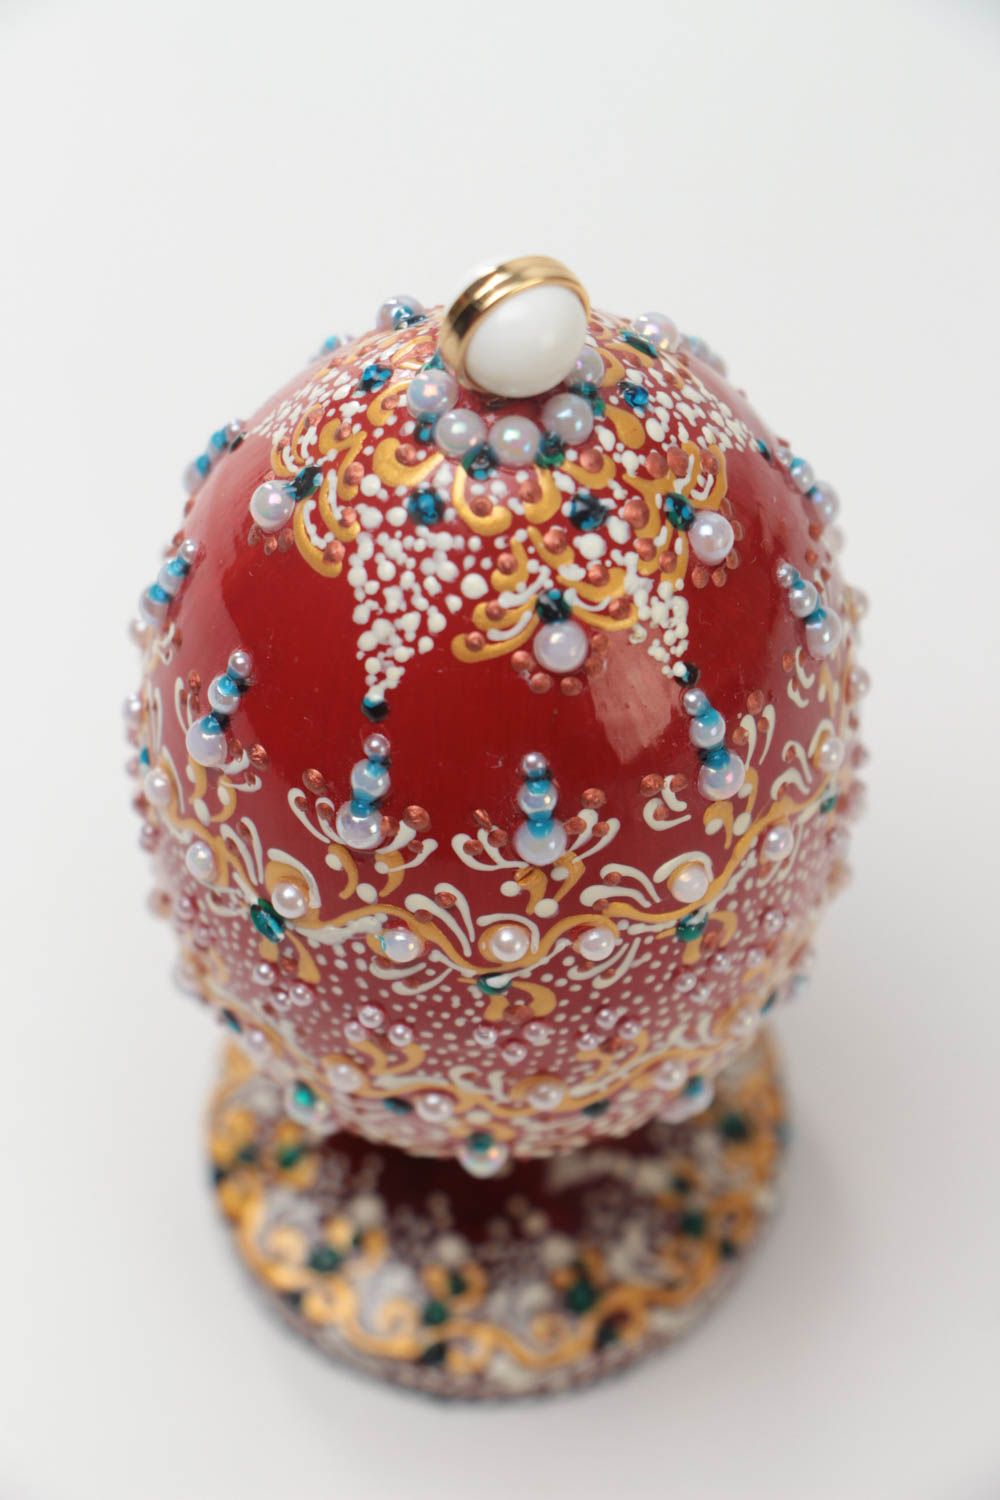 Handmade interior decorative wooden painted egg on stand decorated with beads photo 4